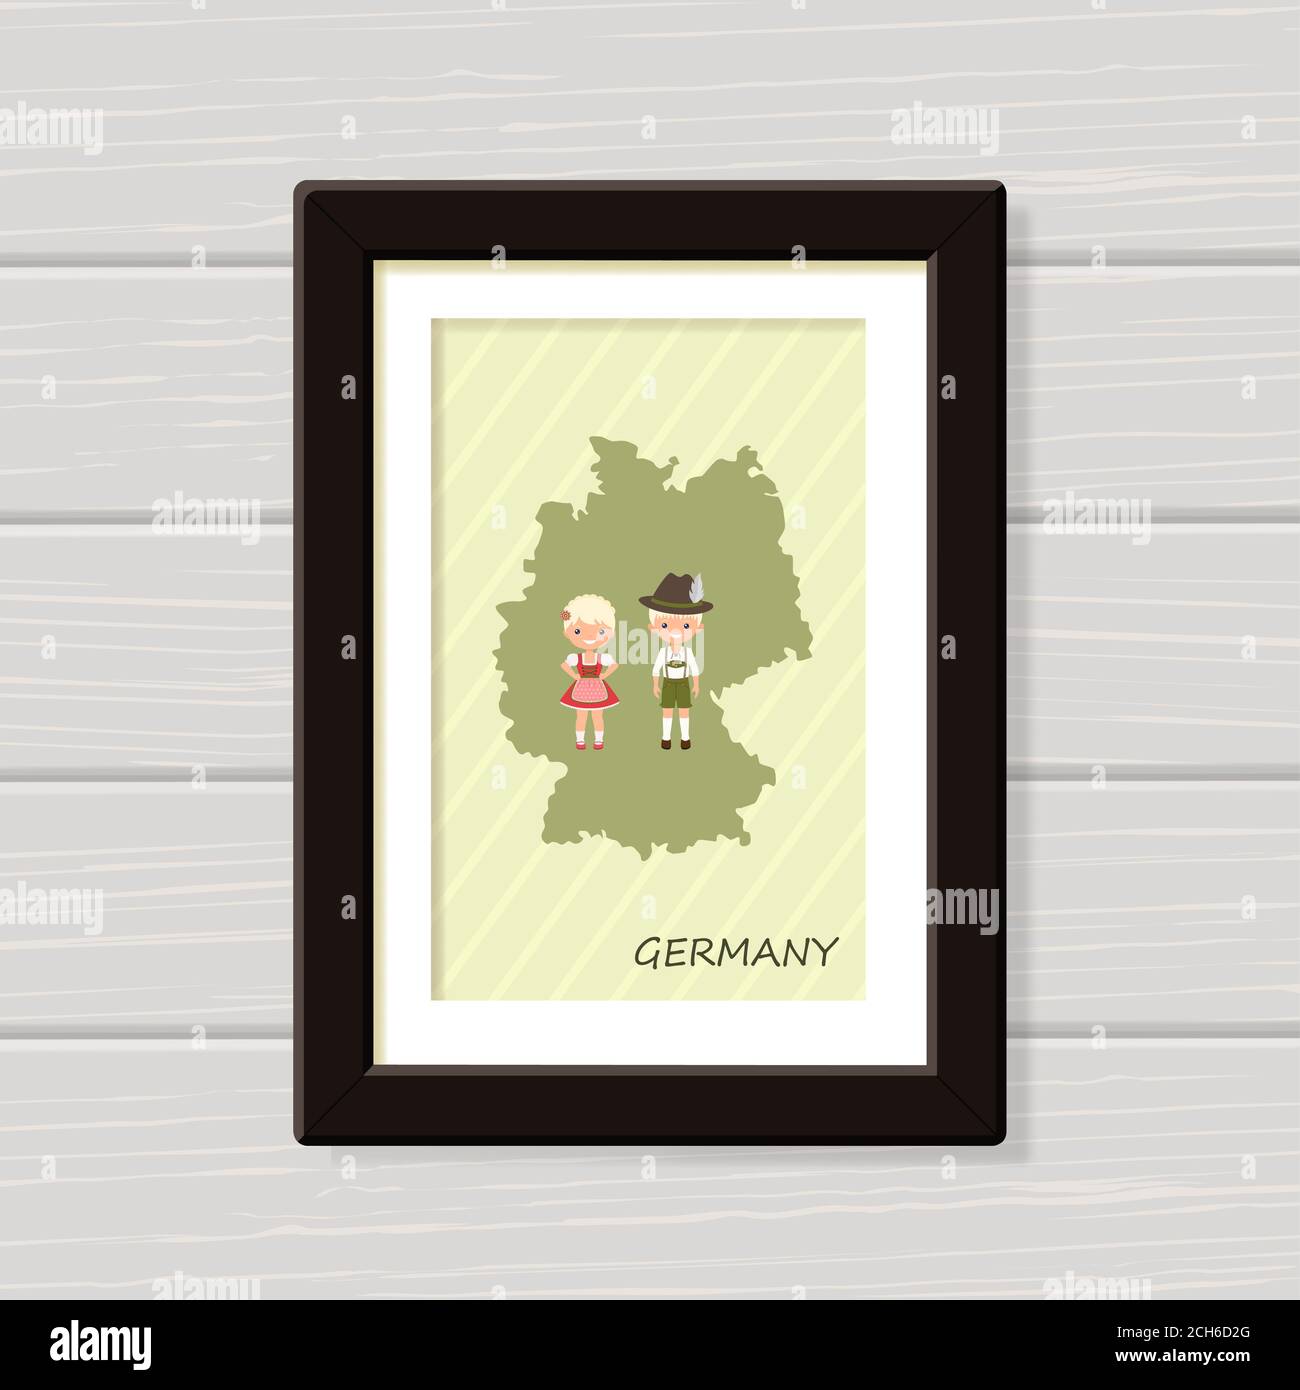 Germany poster with people in national costume.Wall art. Framed map for wall decor. Vector illustration Stock Photo